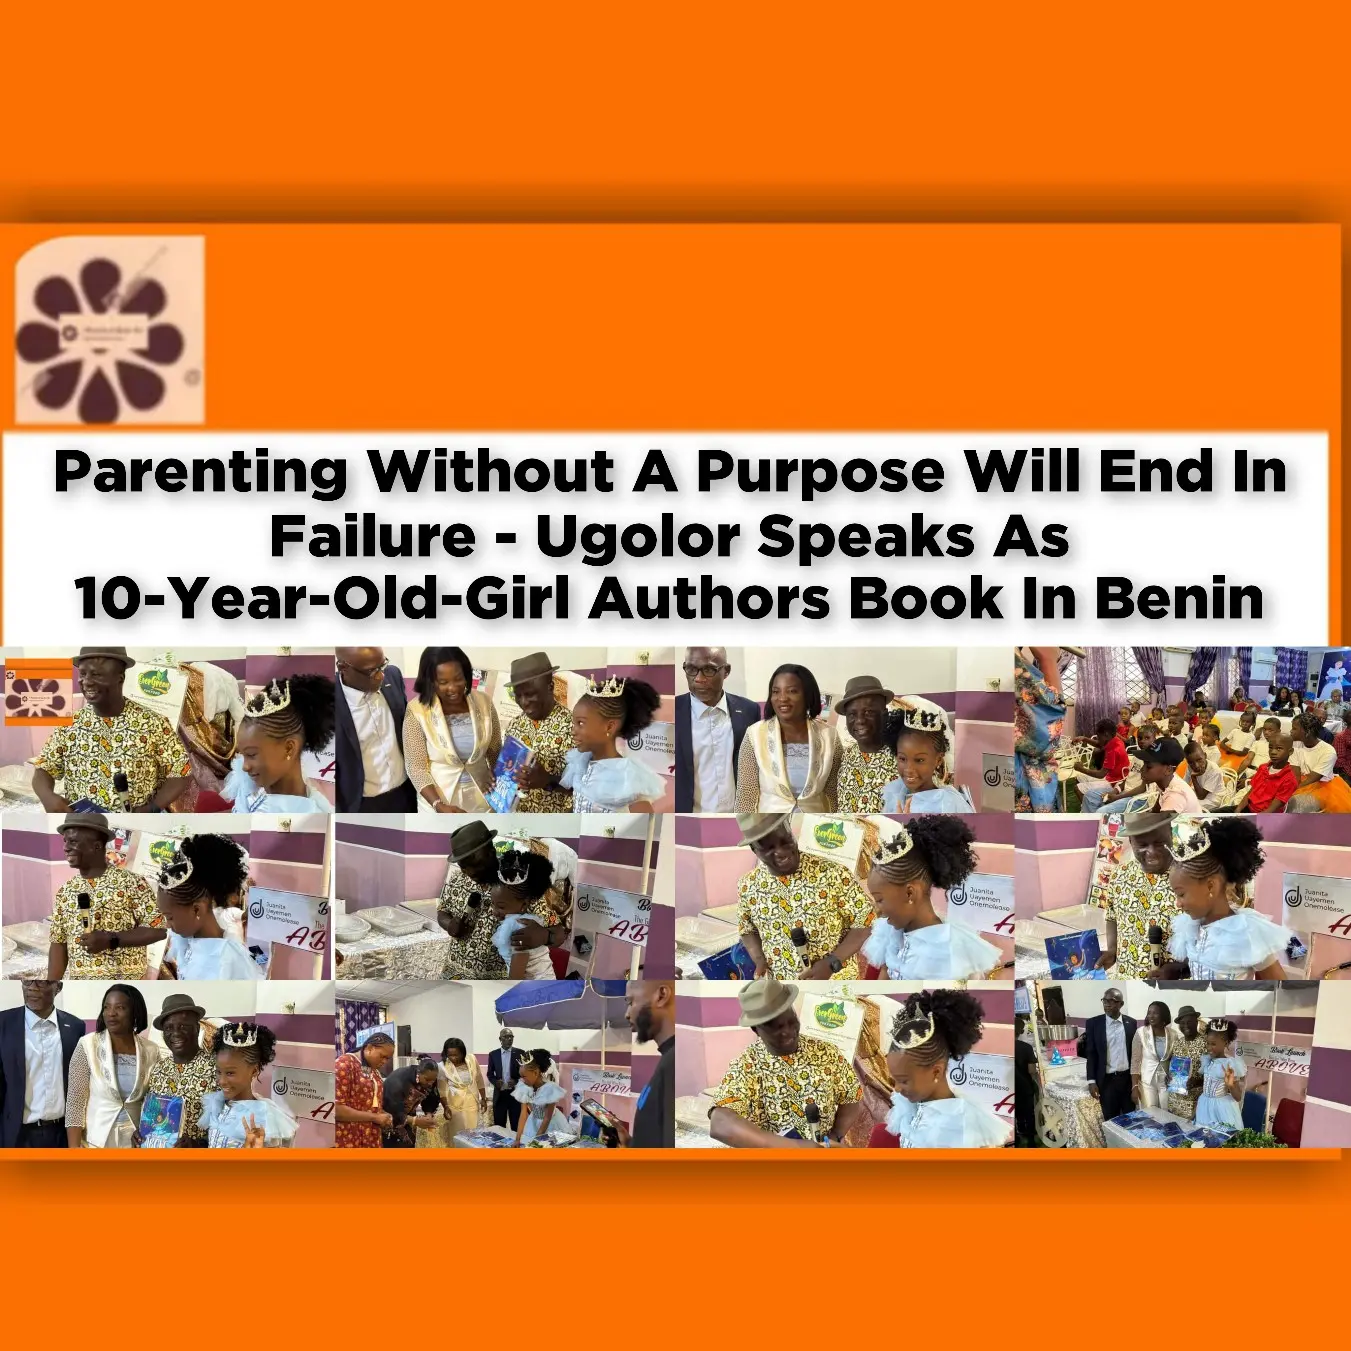 Parenting Without A Purpose Will End In Failure - Ugolor Speaks As 10-Year-Old-Girl Authors Book In Benin ~ OsazuwaAkonedo #Shell